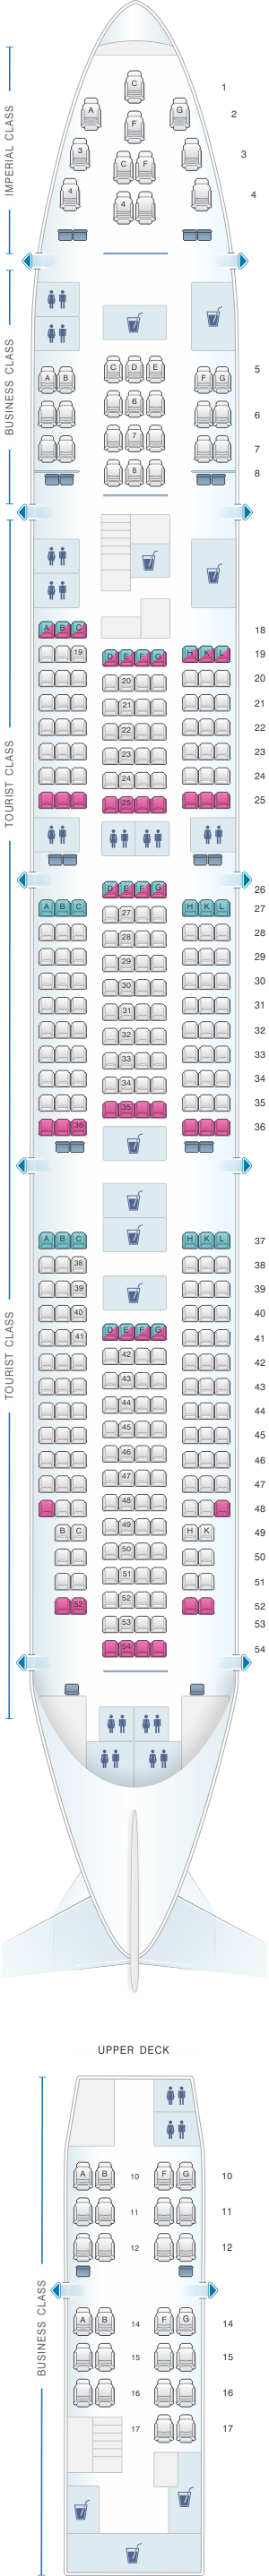 Seat map for Transaero Airlines Boeing B747 400 Config. 5